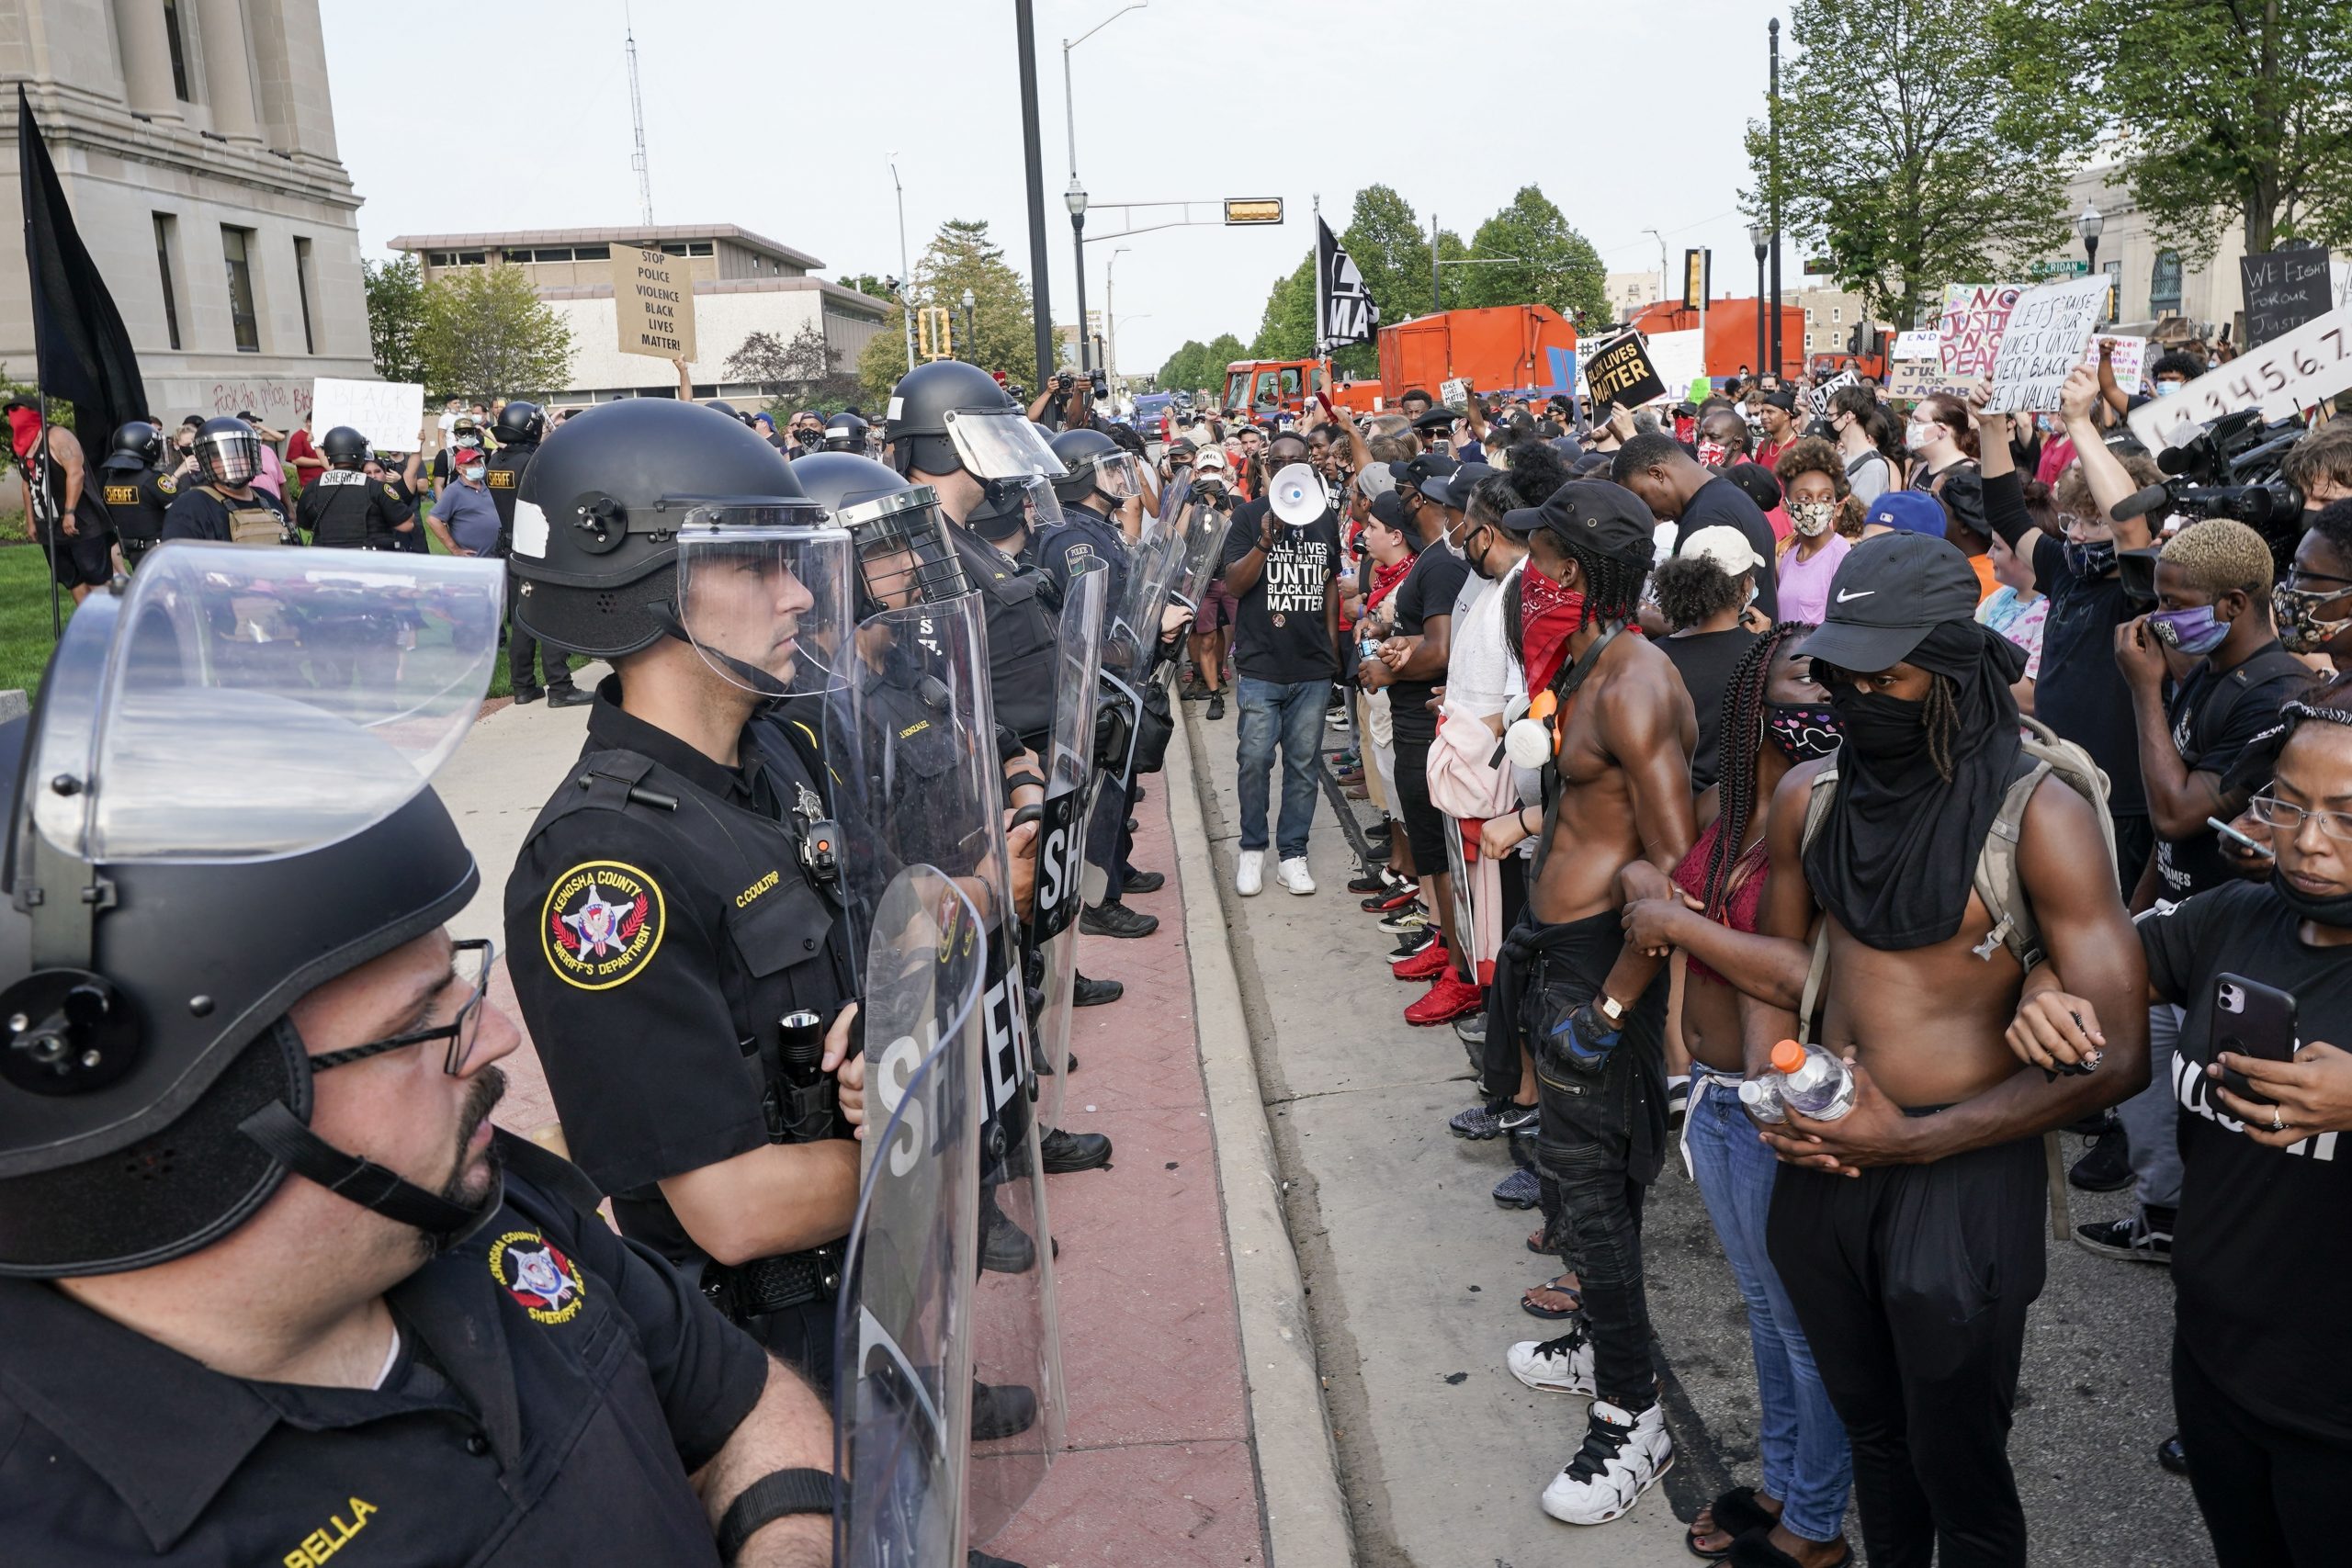 Heavy police deployment in Kenosha as anger mounts over US police shootings